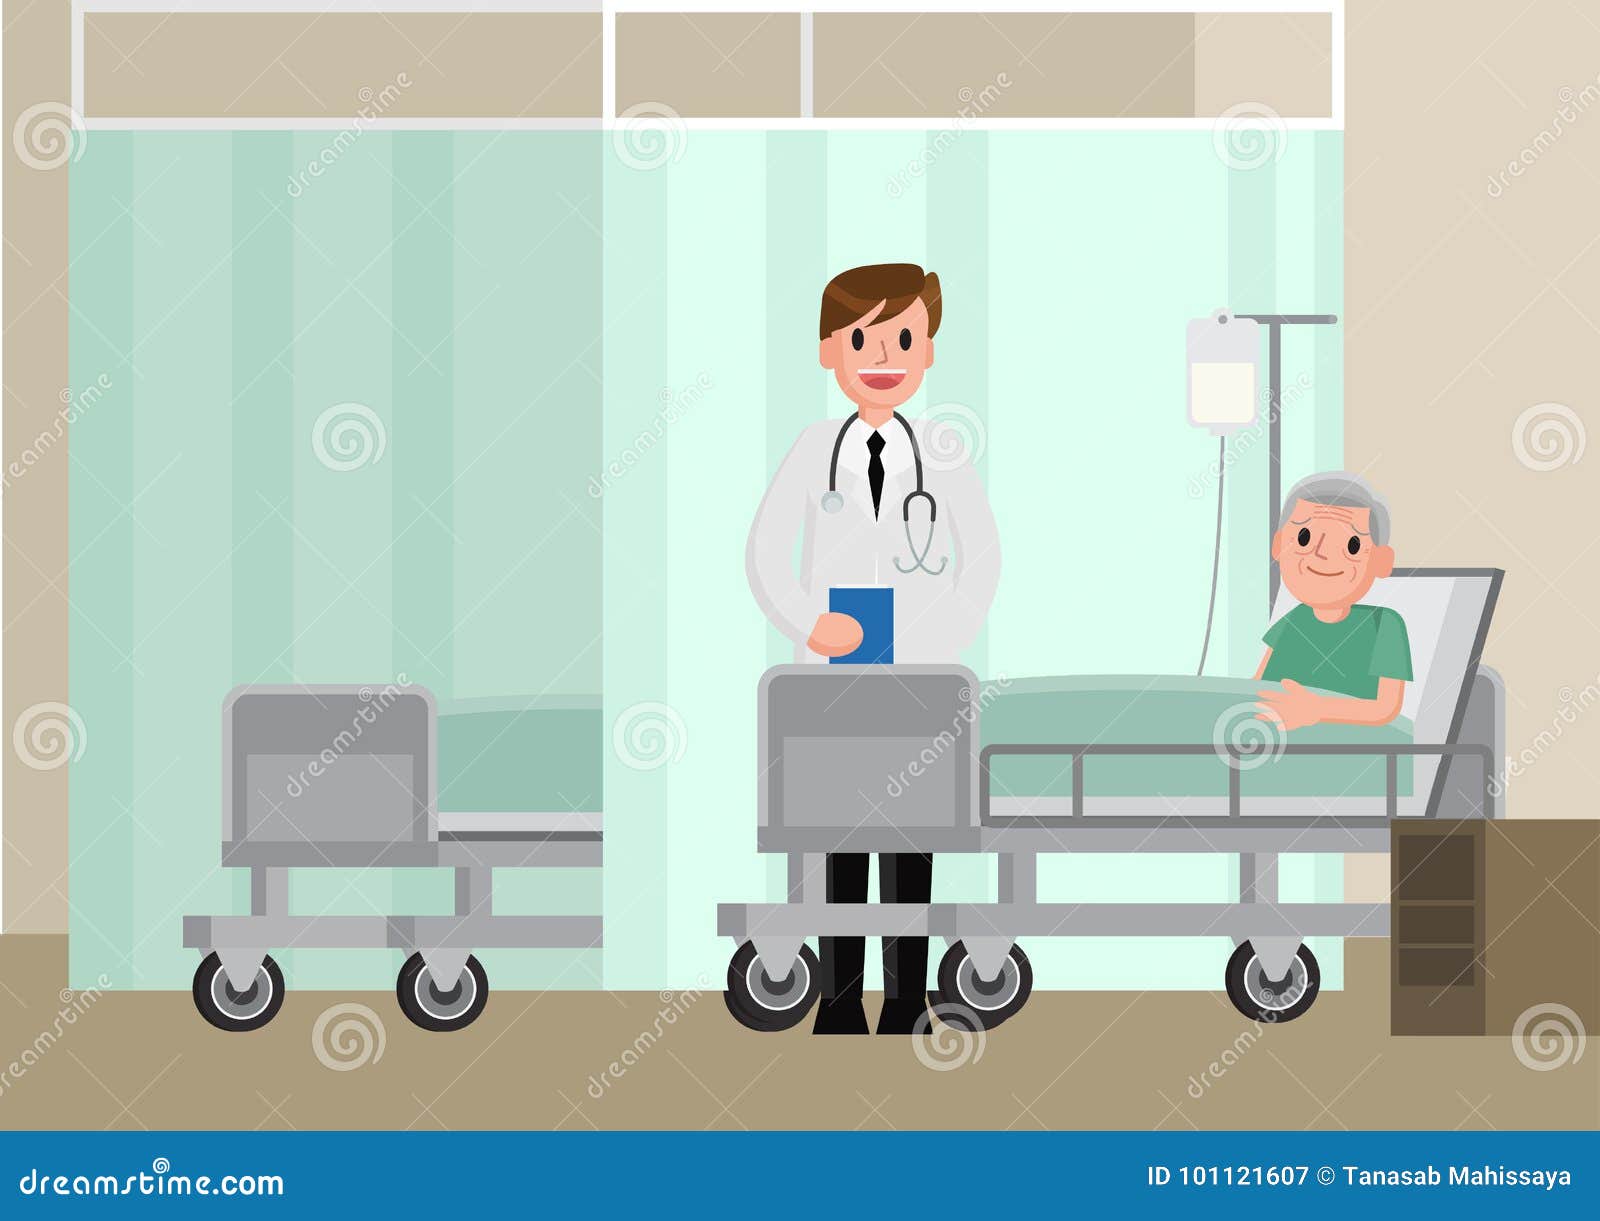 a doctor visits a patient lying on hospital bed. senior man resting in a bed.